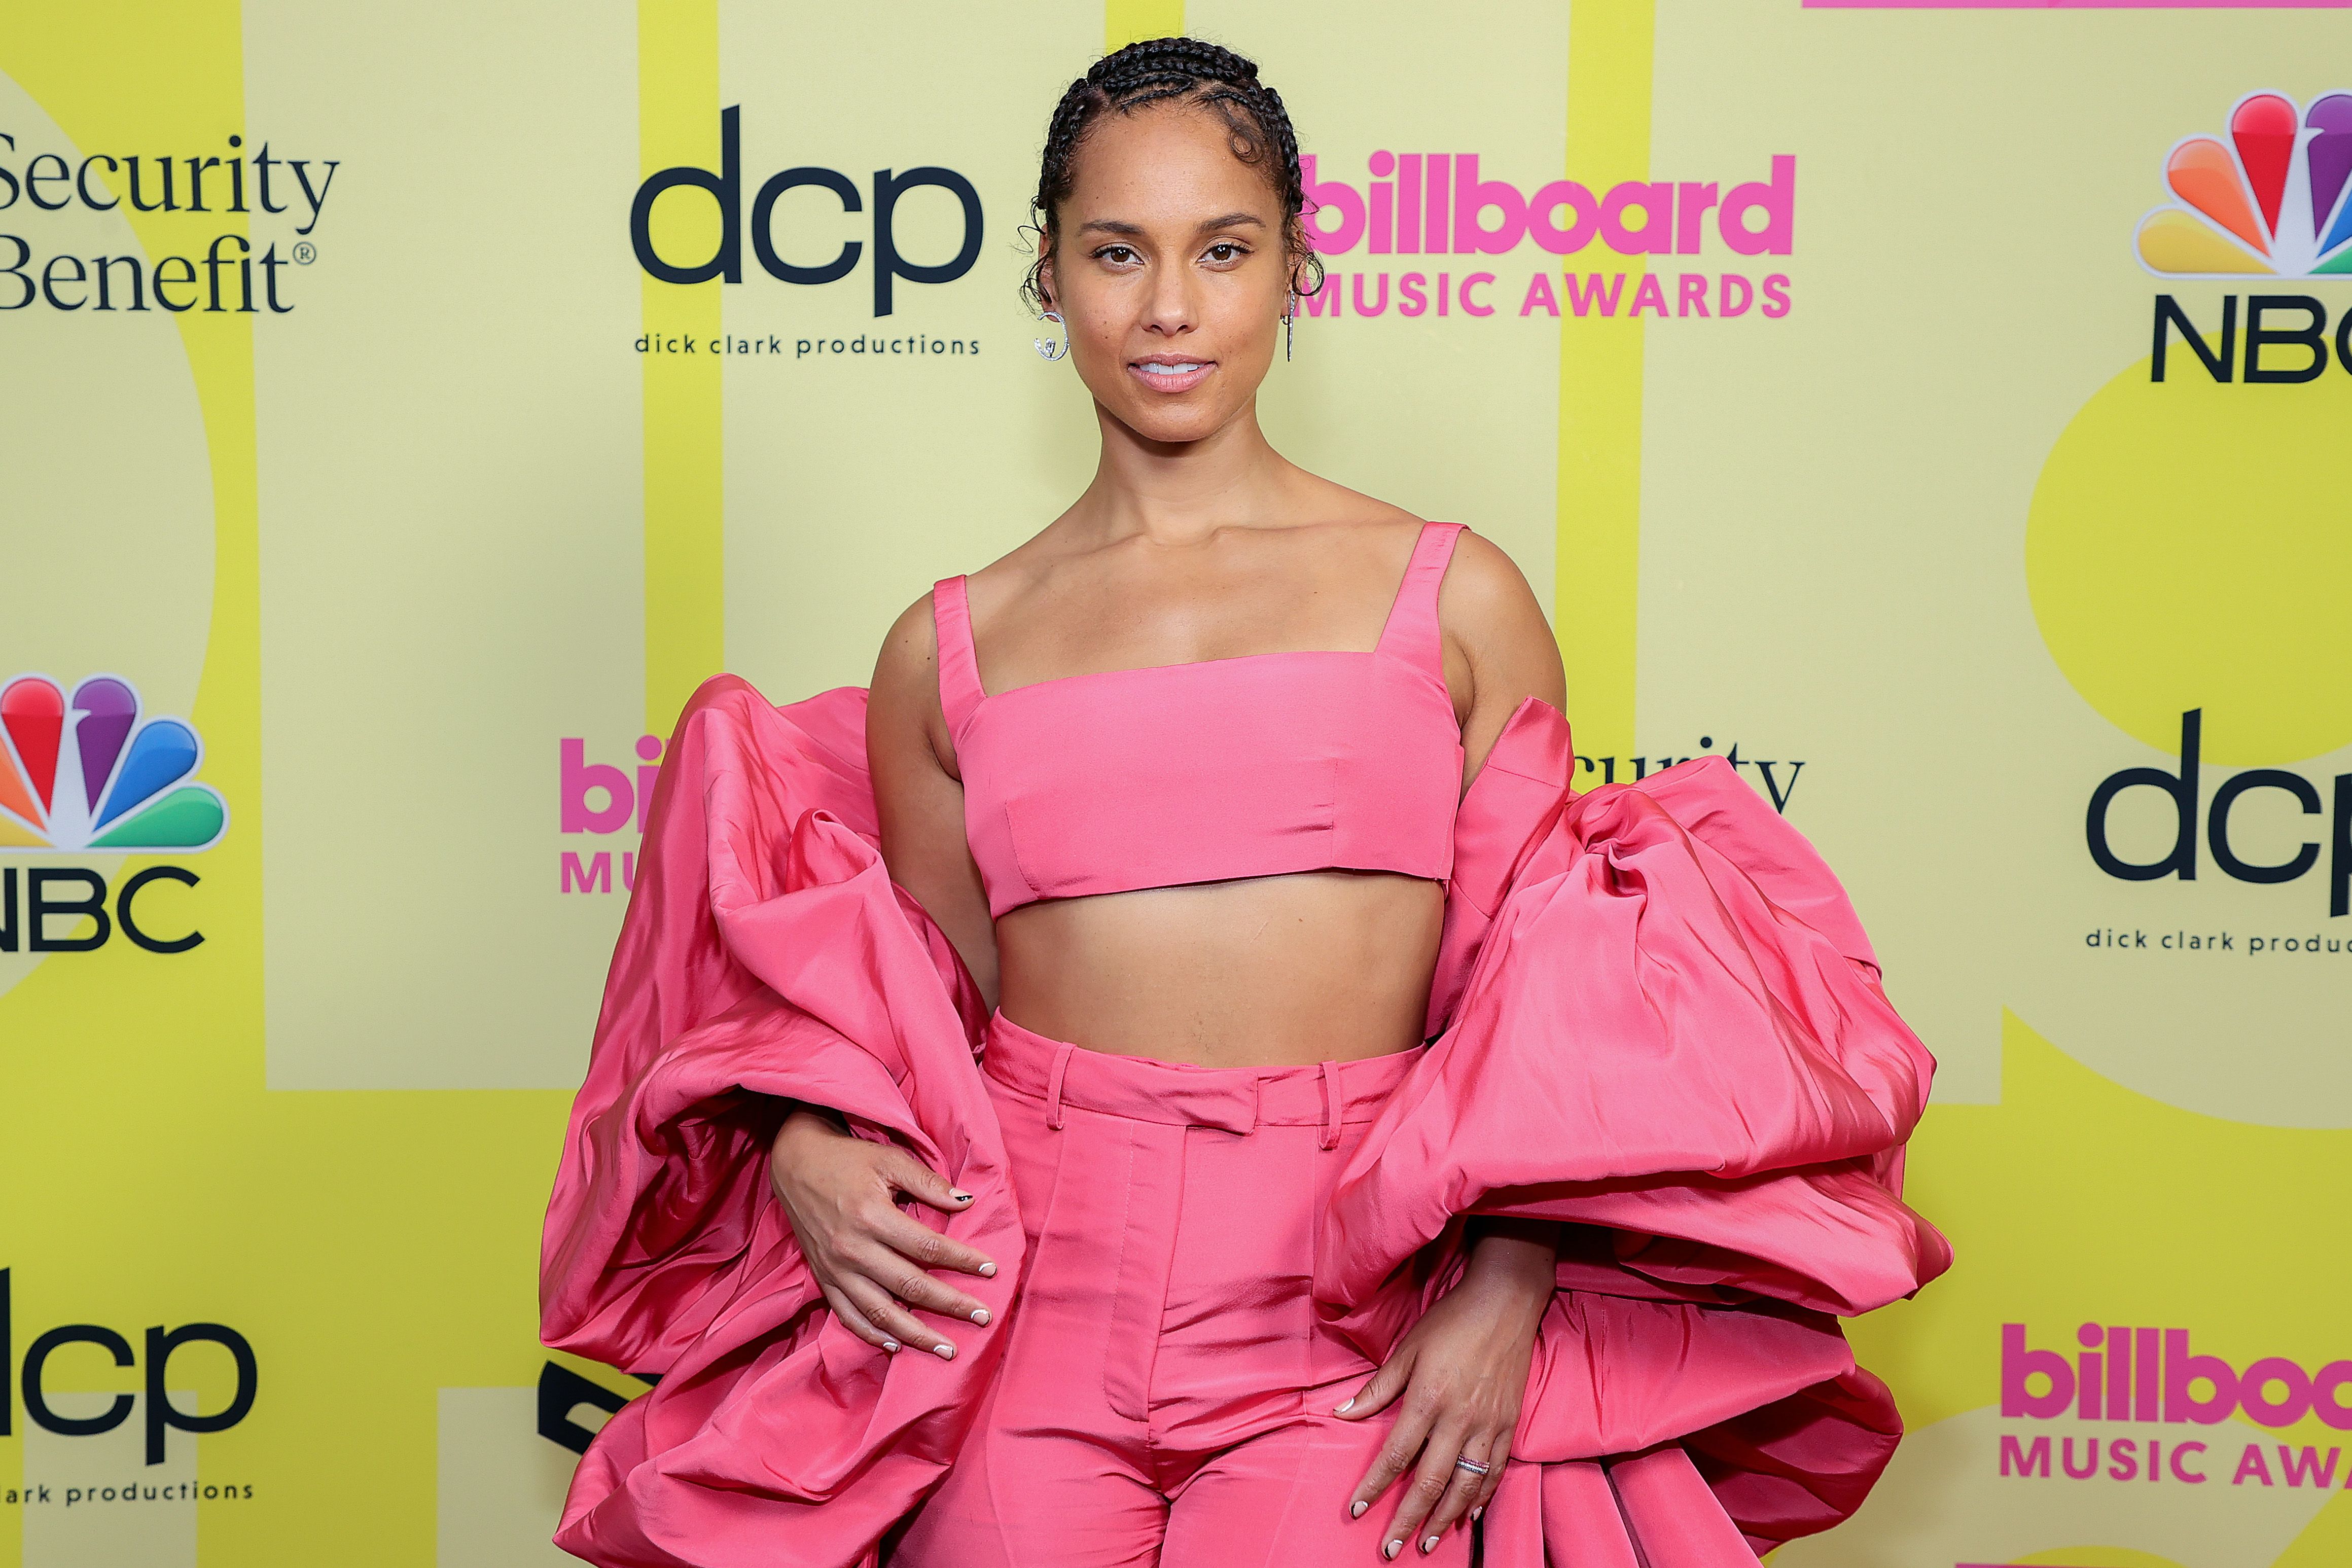 Alicia Keys Slays With Ultra-Toned Abs In A Bra Top In IG Tour Pic